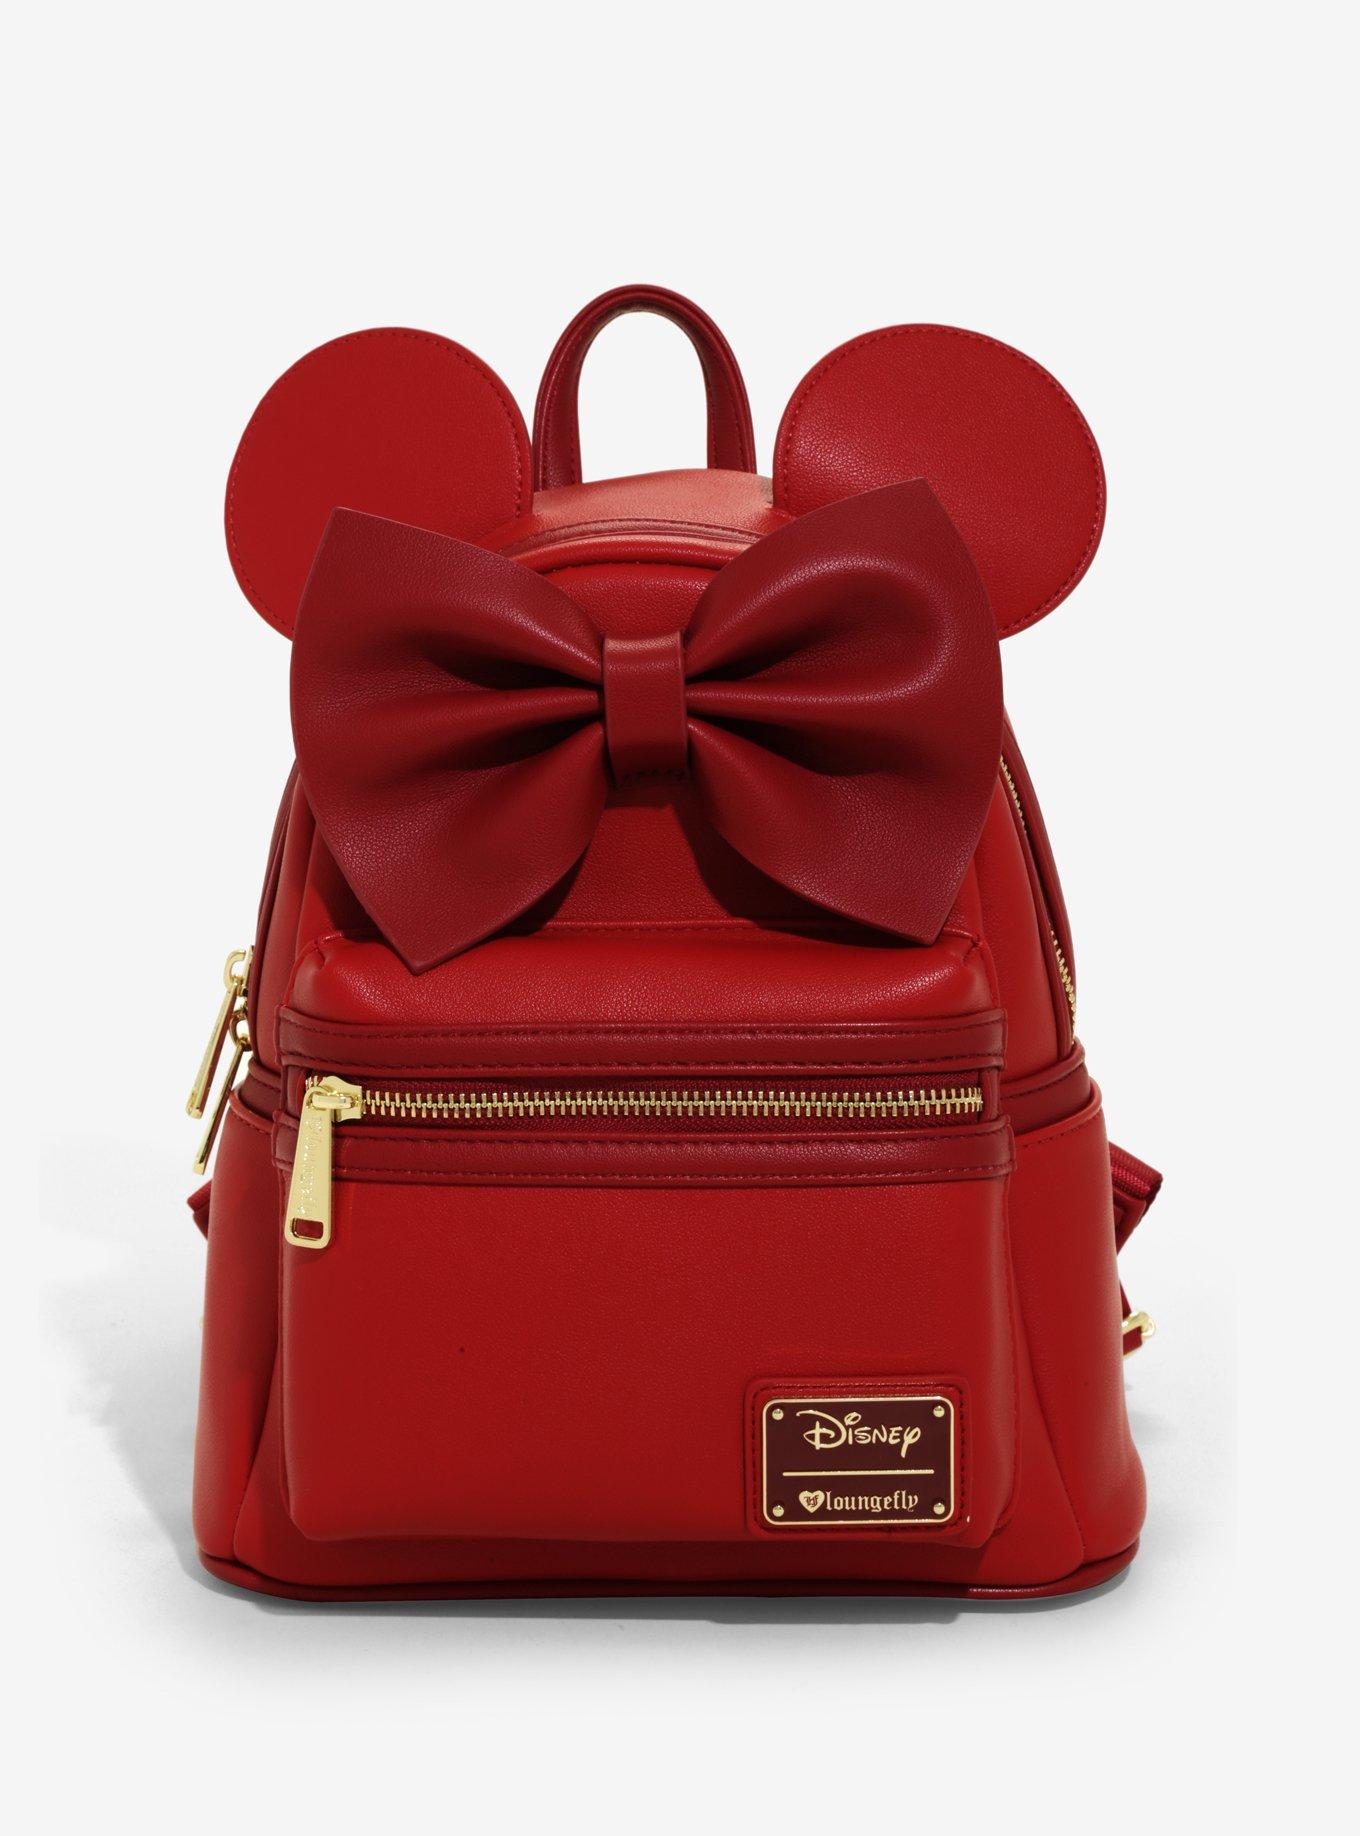 Loungefly Disney Minnie Mouse Red Ears Mini Backpack Boxlunch